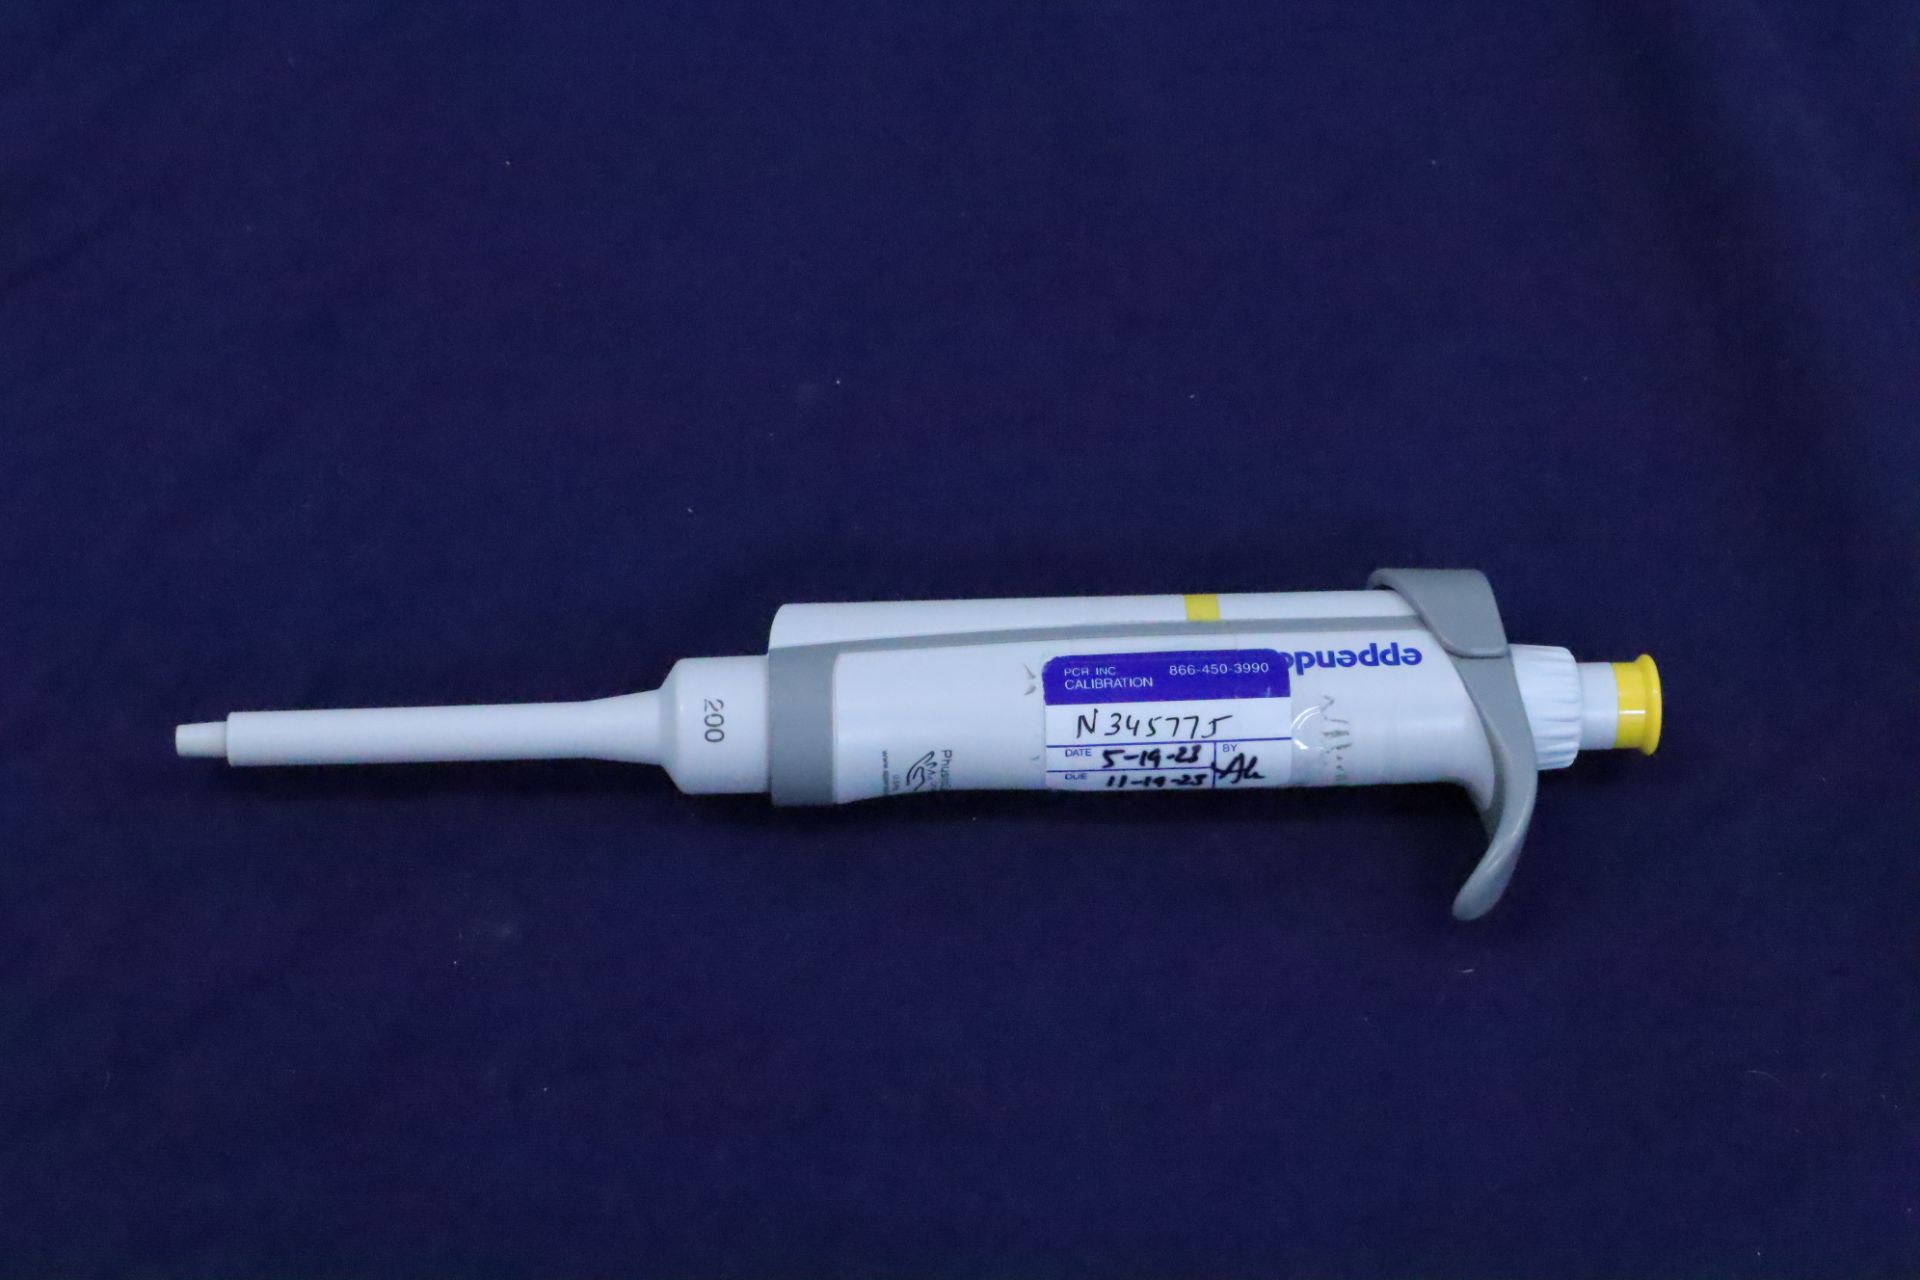 Eppendorf Research Plus Adjustable Volume Pipette 20-200 uL - Image 2 of 4